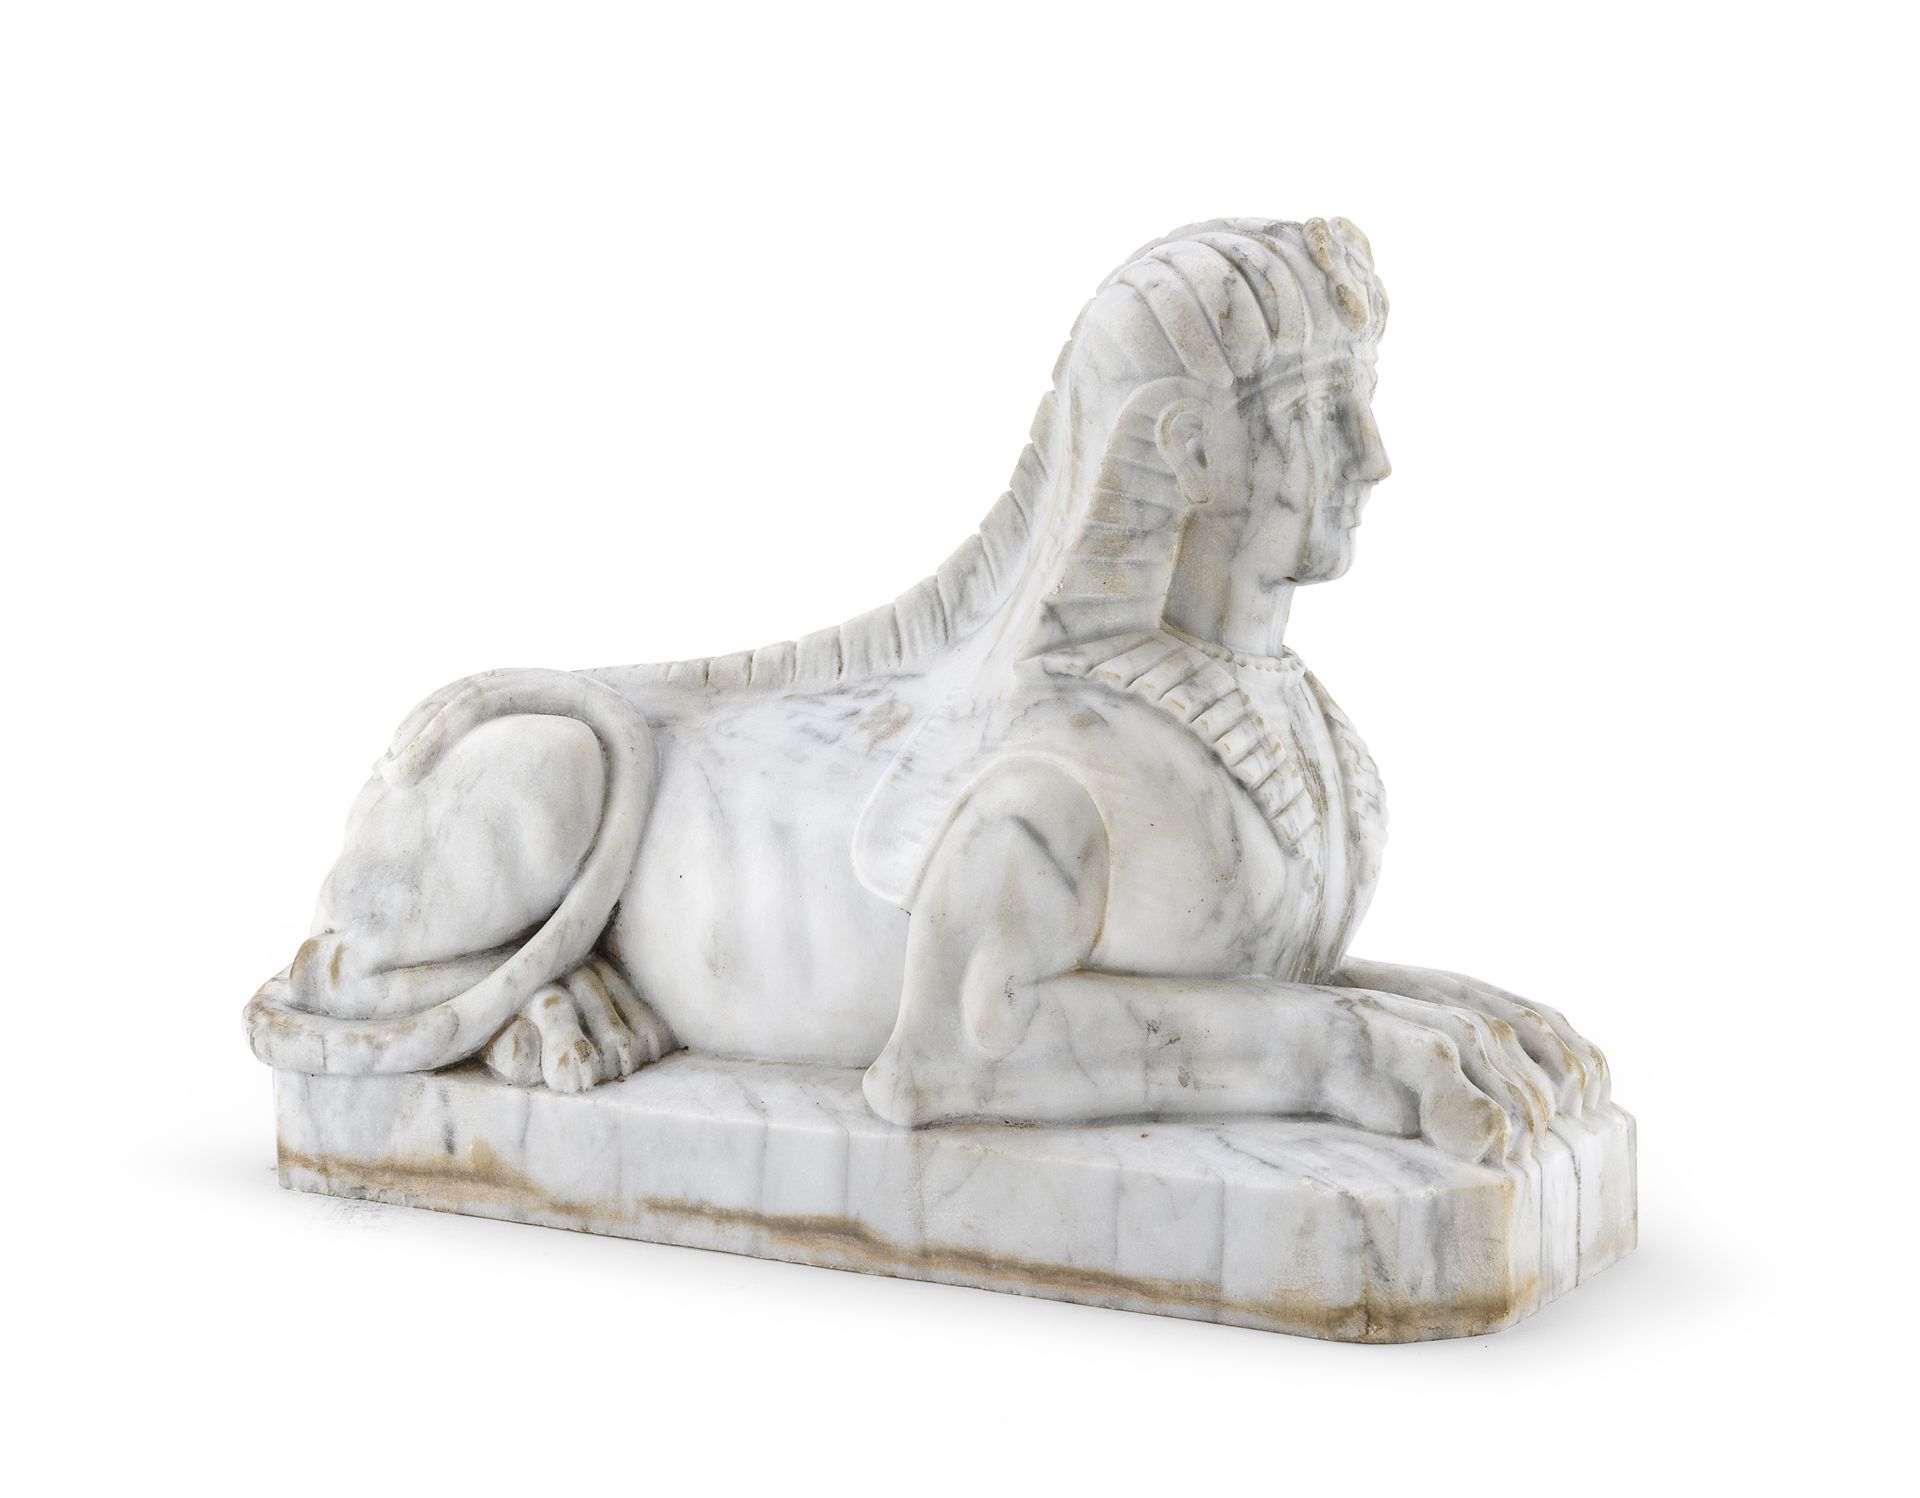 NEOCLASSICAL MARBLE SCULPTURE OF THE SPHINX EARLY 19TH CENTURY - Image 2 of 2